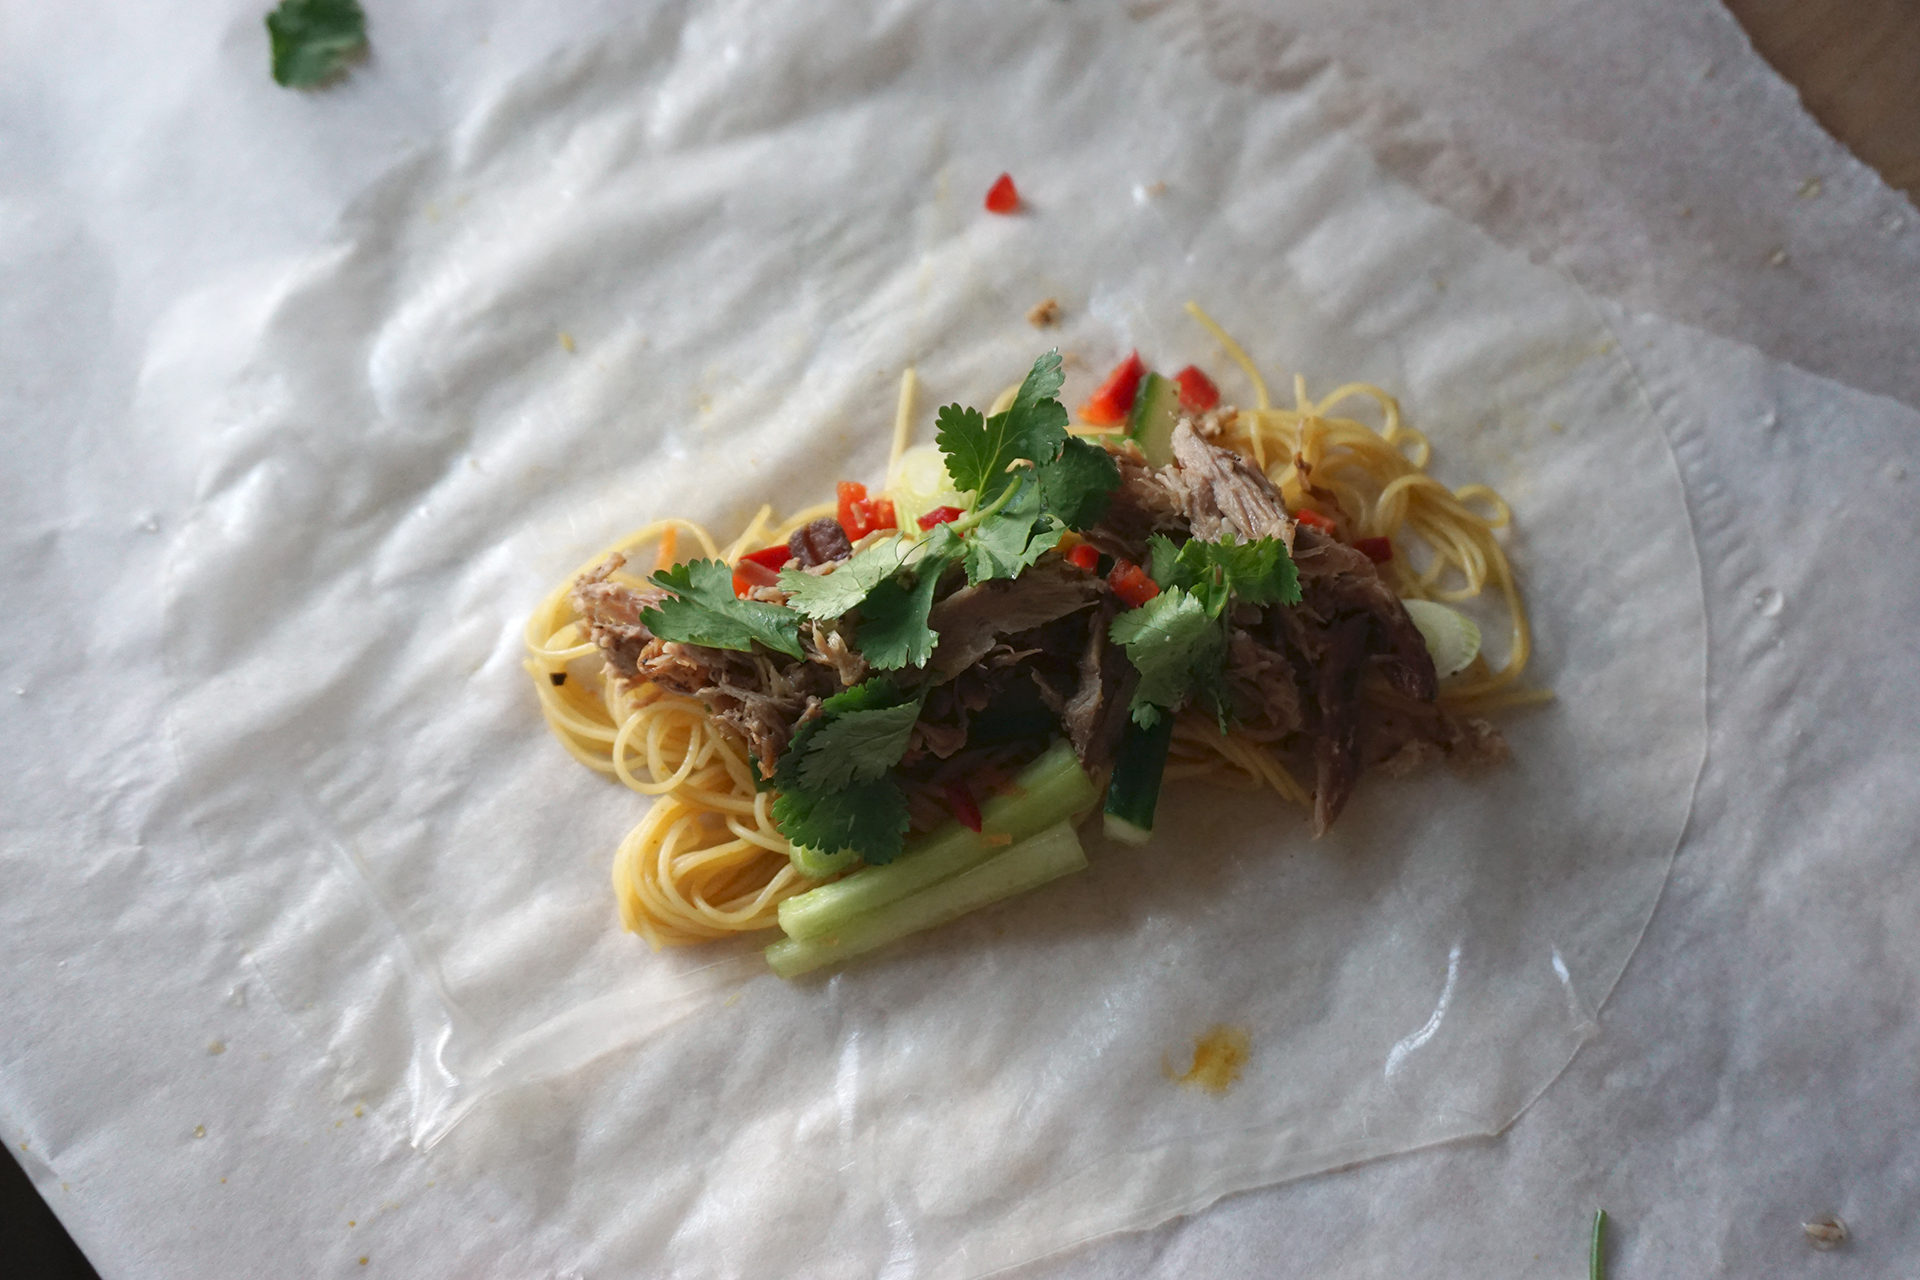 Gluten free Chinese crispy duck spring rolls made with easy Singapore noodles